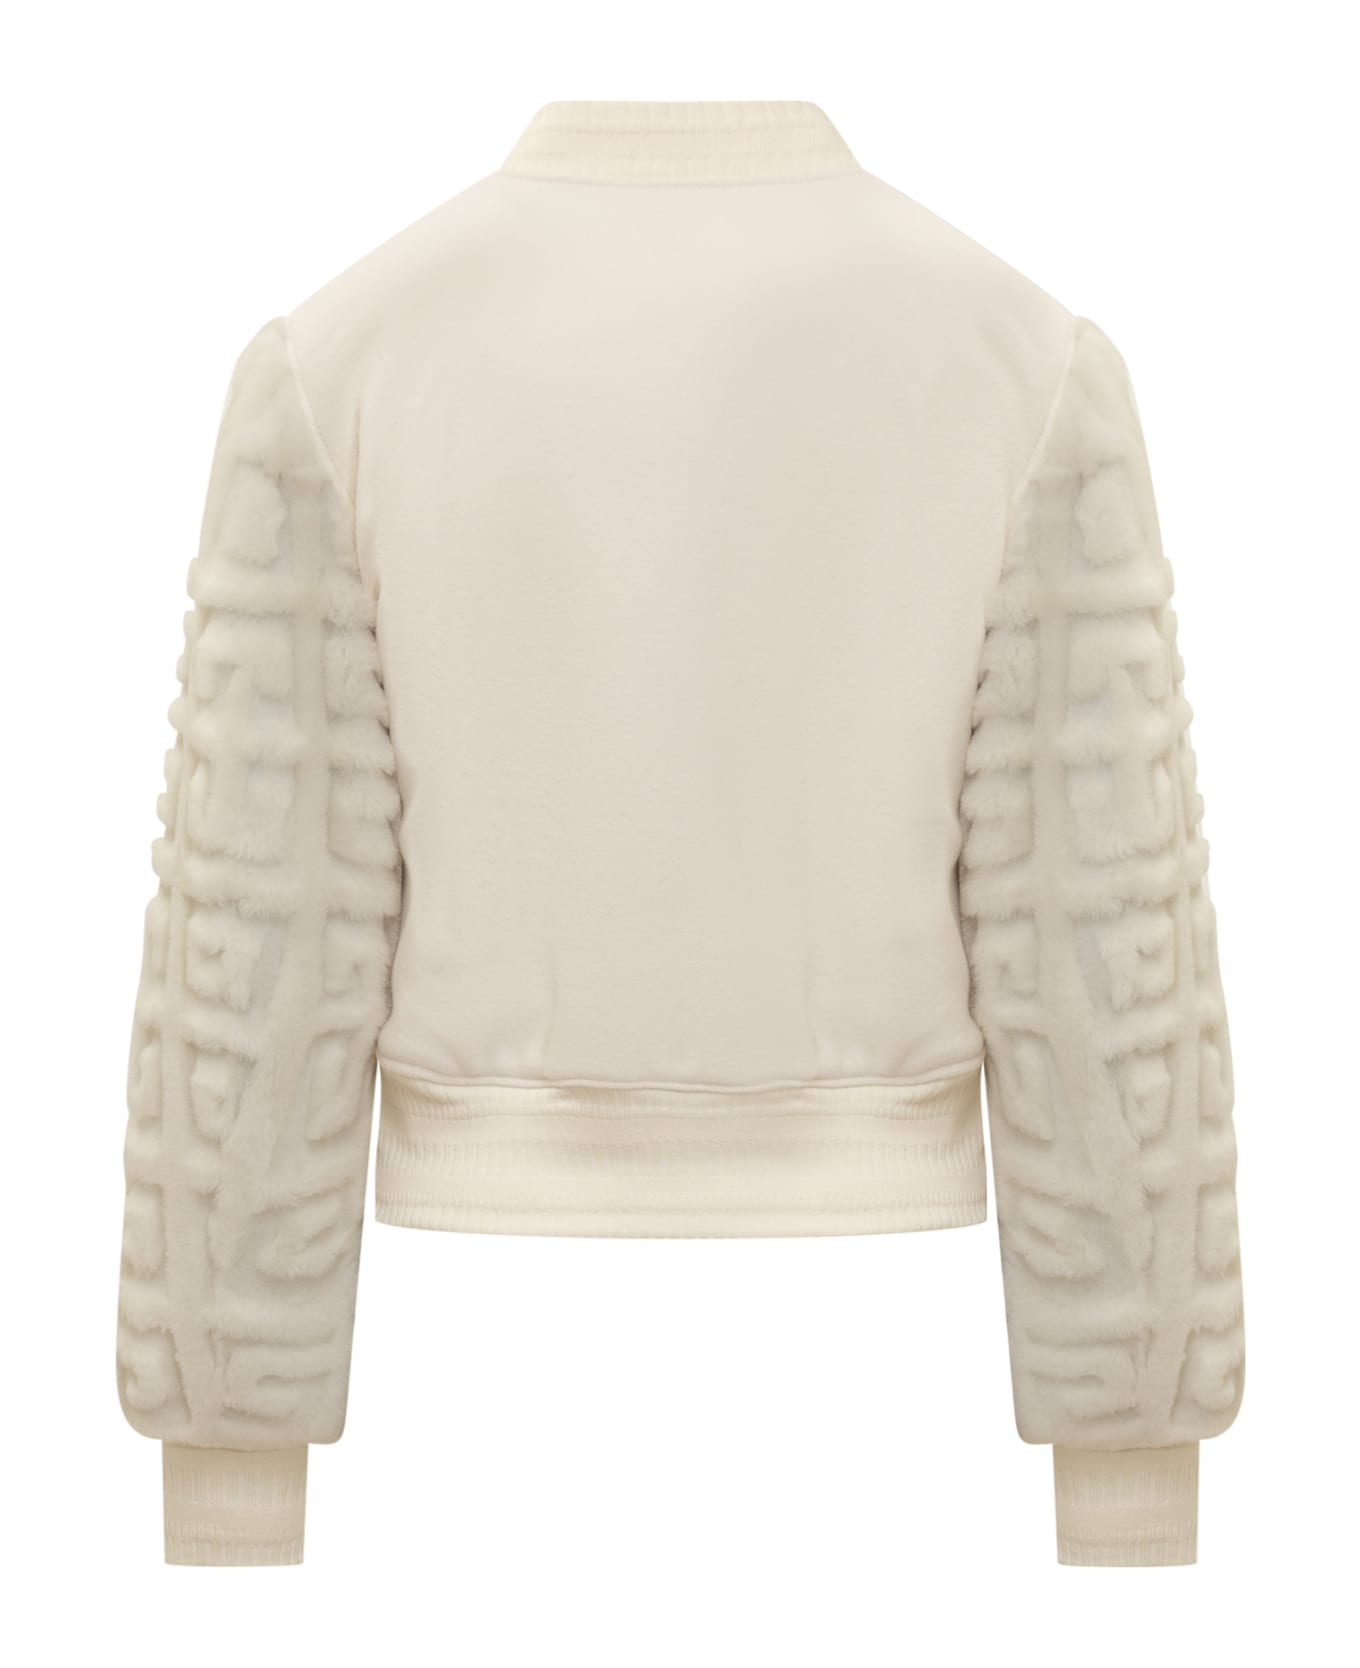 Givenchy Wool And Fur Short Bomber Jacket - WHITE